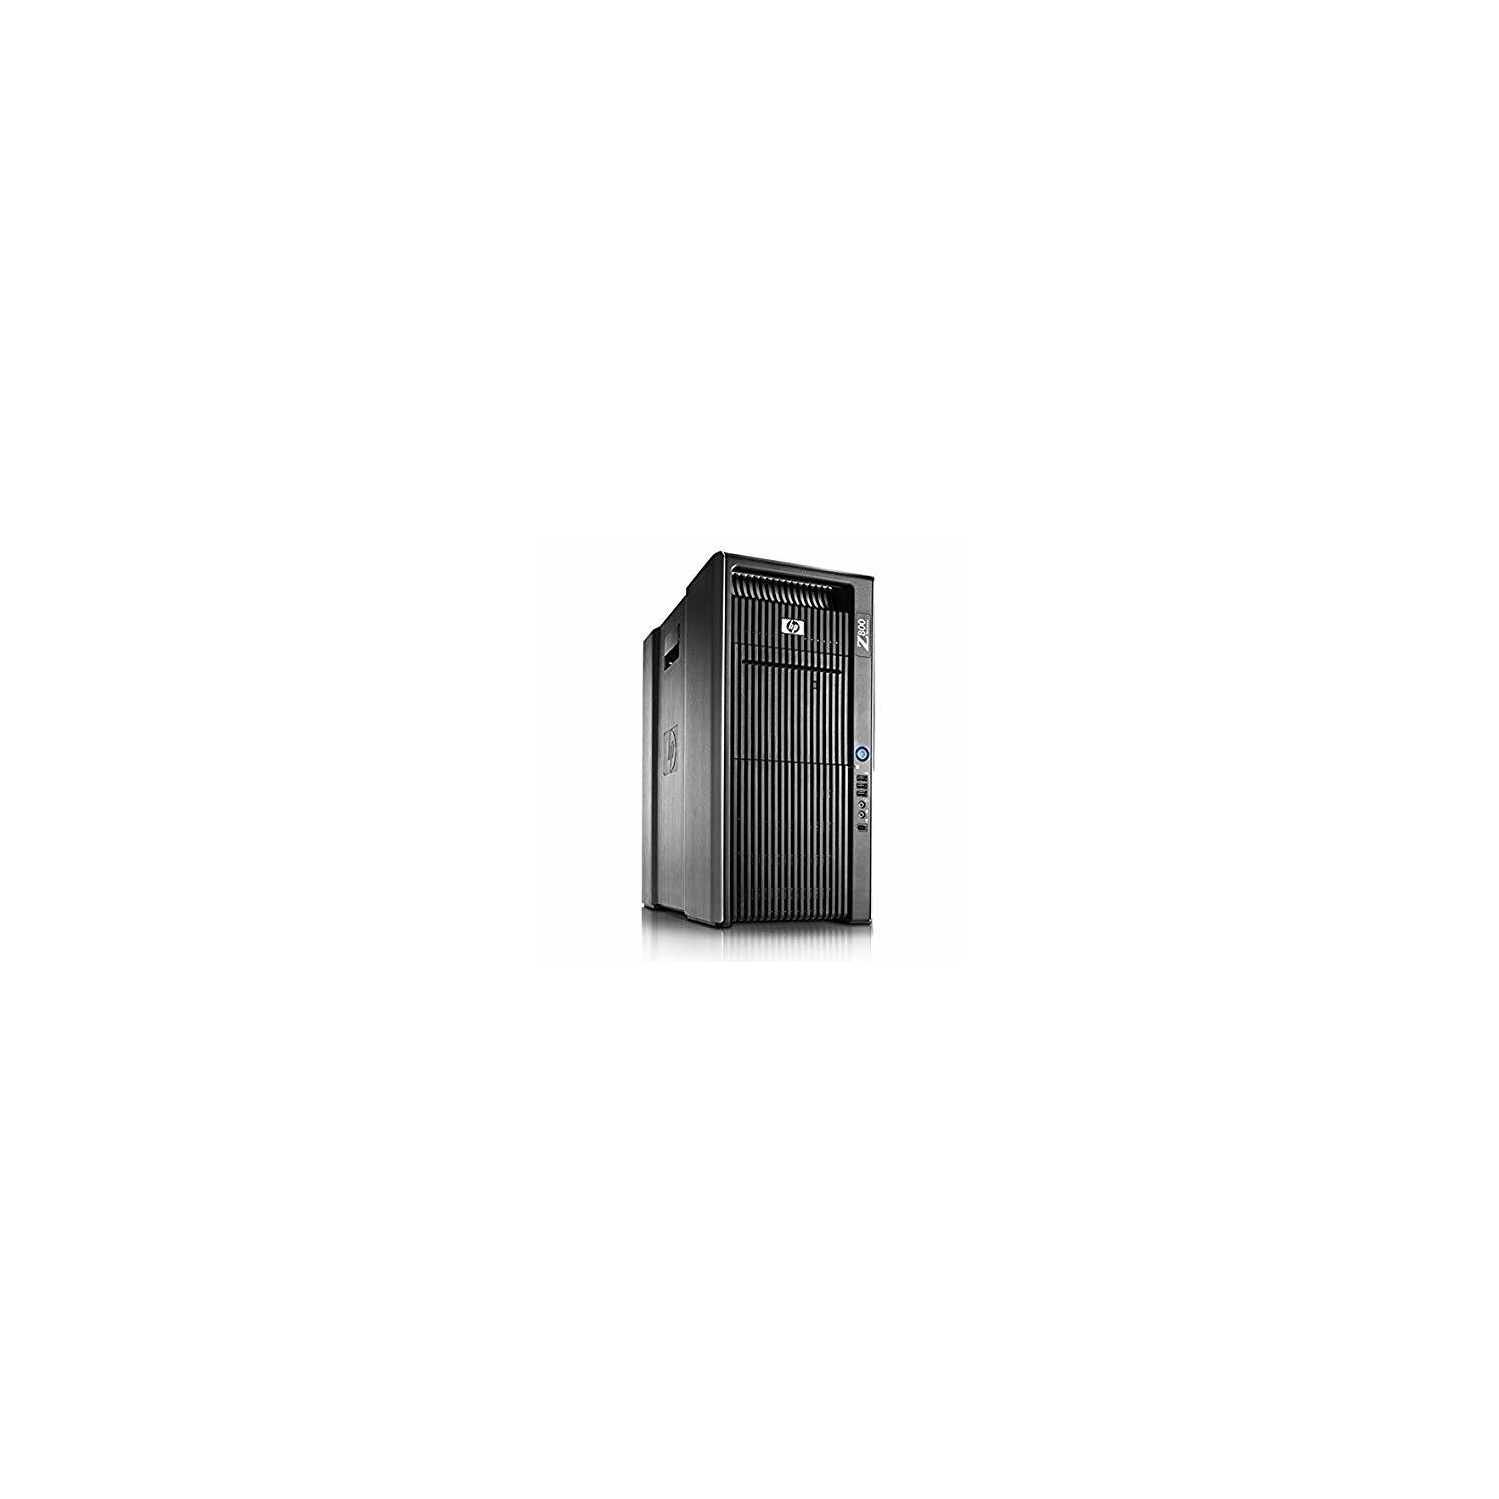 Refurbished (Good) - HP Z800 Computer Workstation- Intel Xeon X5660 2.8GHz - New 256GB SSD + 3TB HDD - 24GB DDR3 - 4 Monitor Capable with Dual Nvidia GT710 - USB 3.0